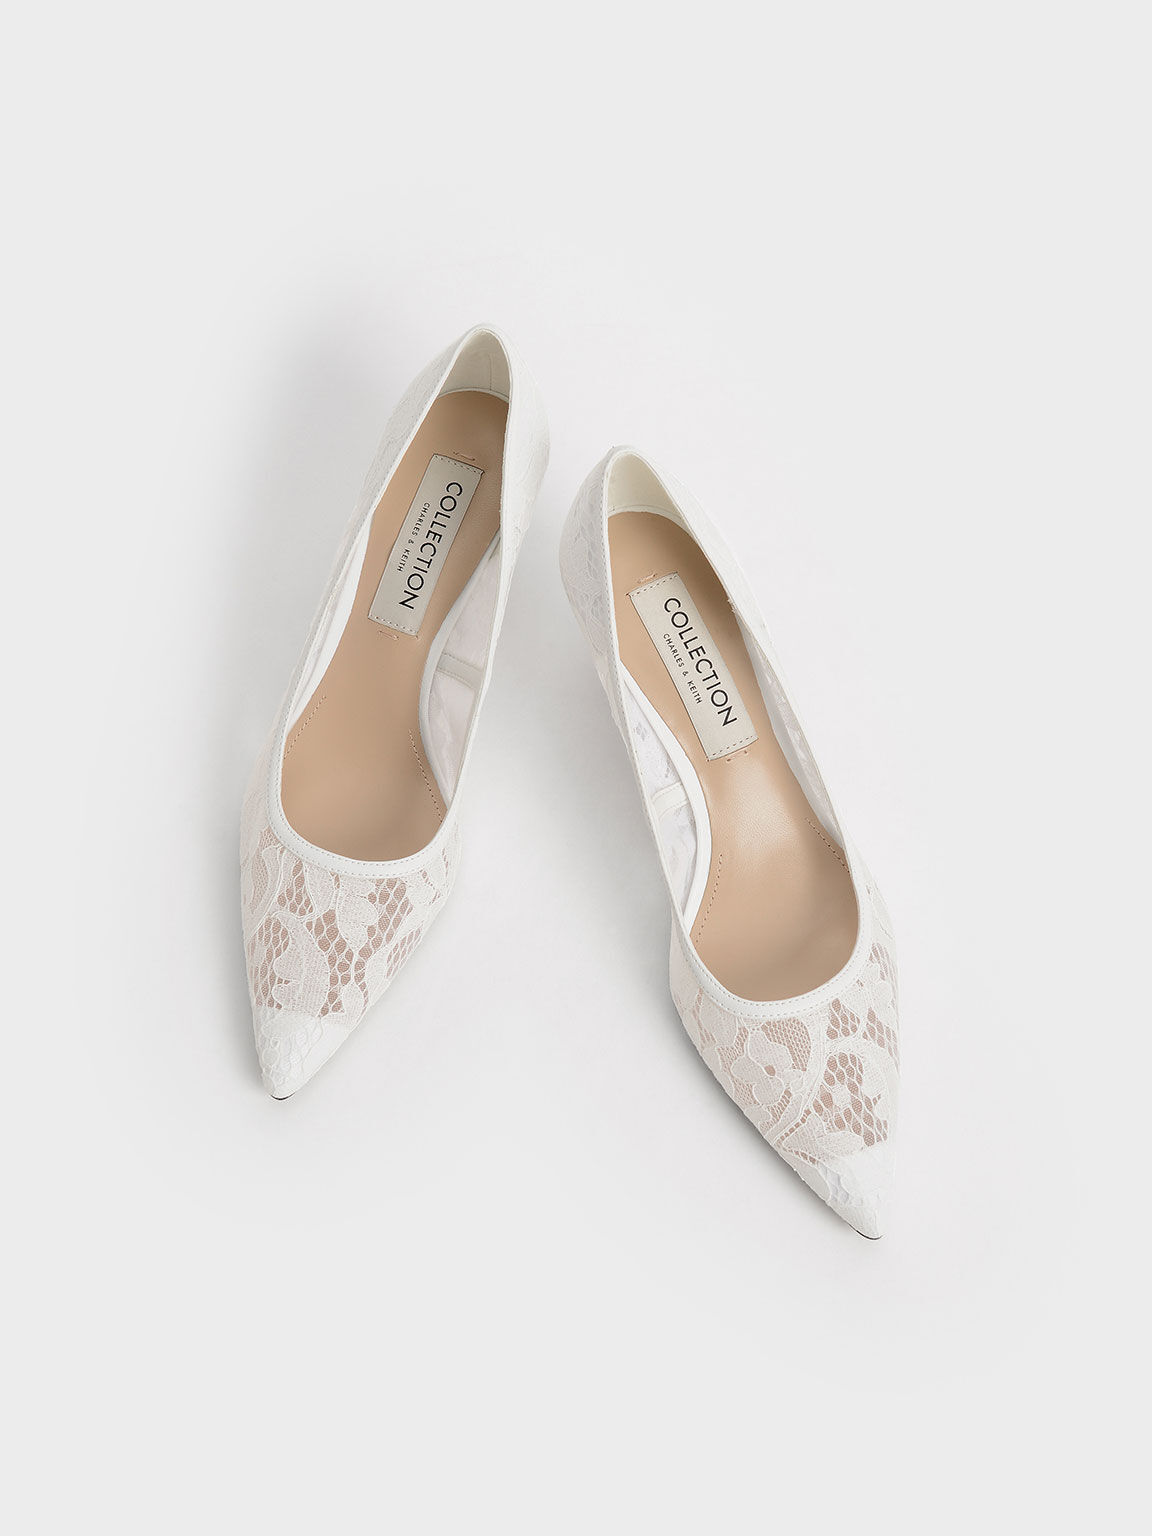 White Lace Sculptural Heel Pumps - CHARLES & KEITH SG